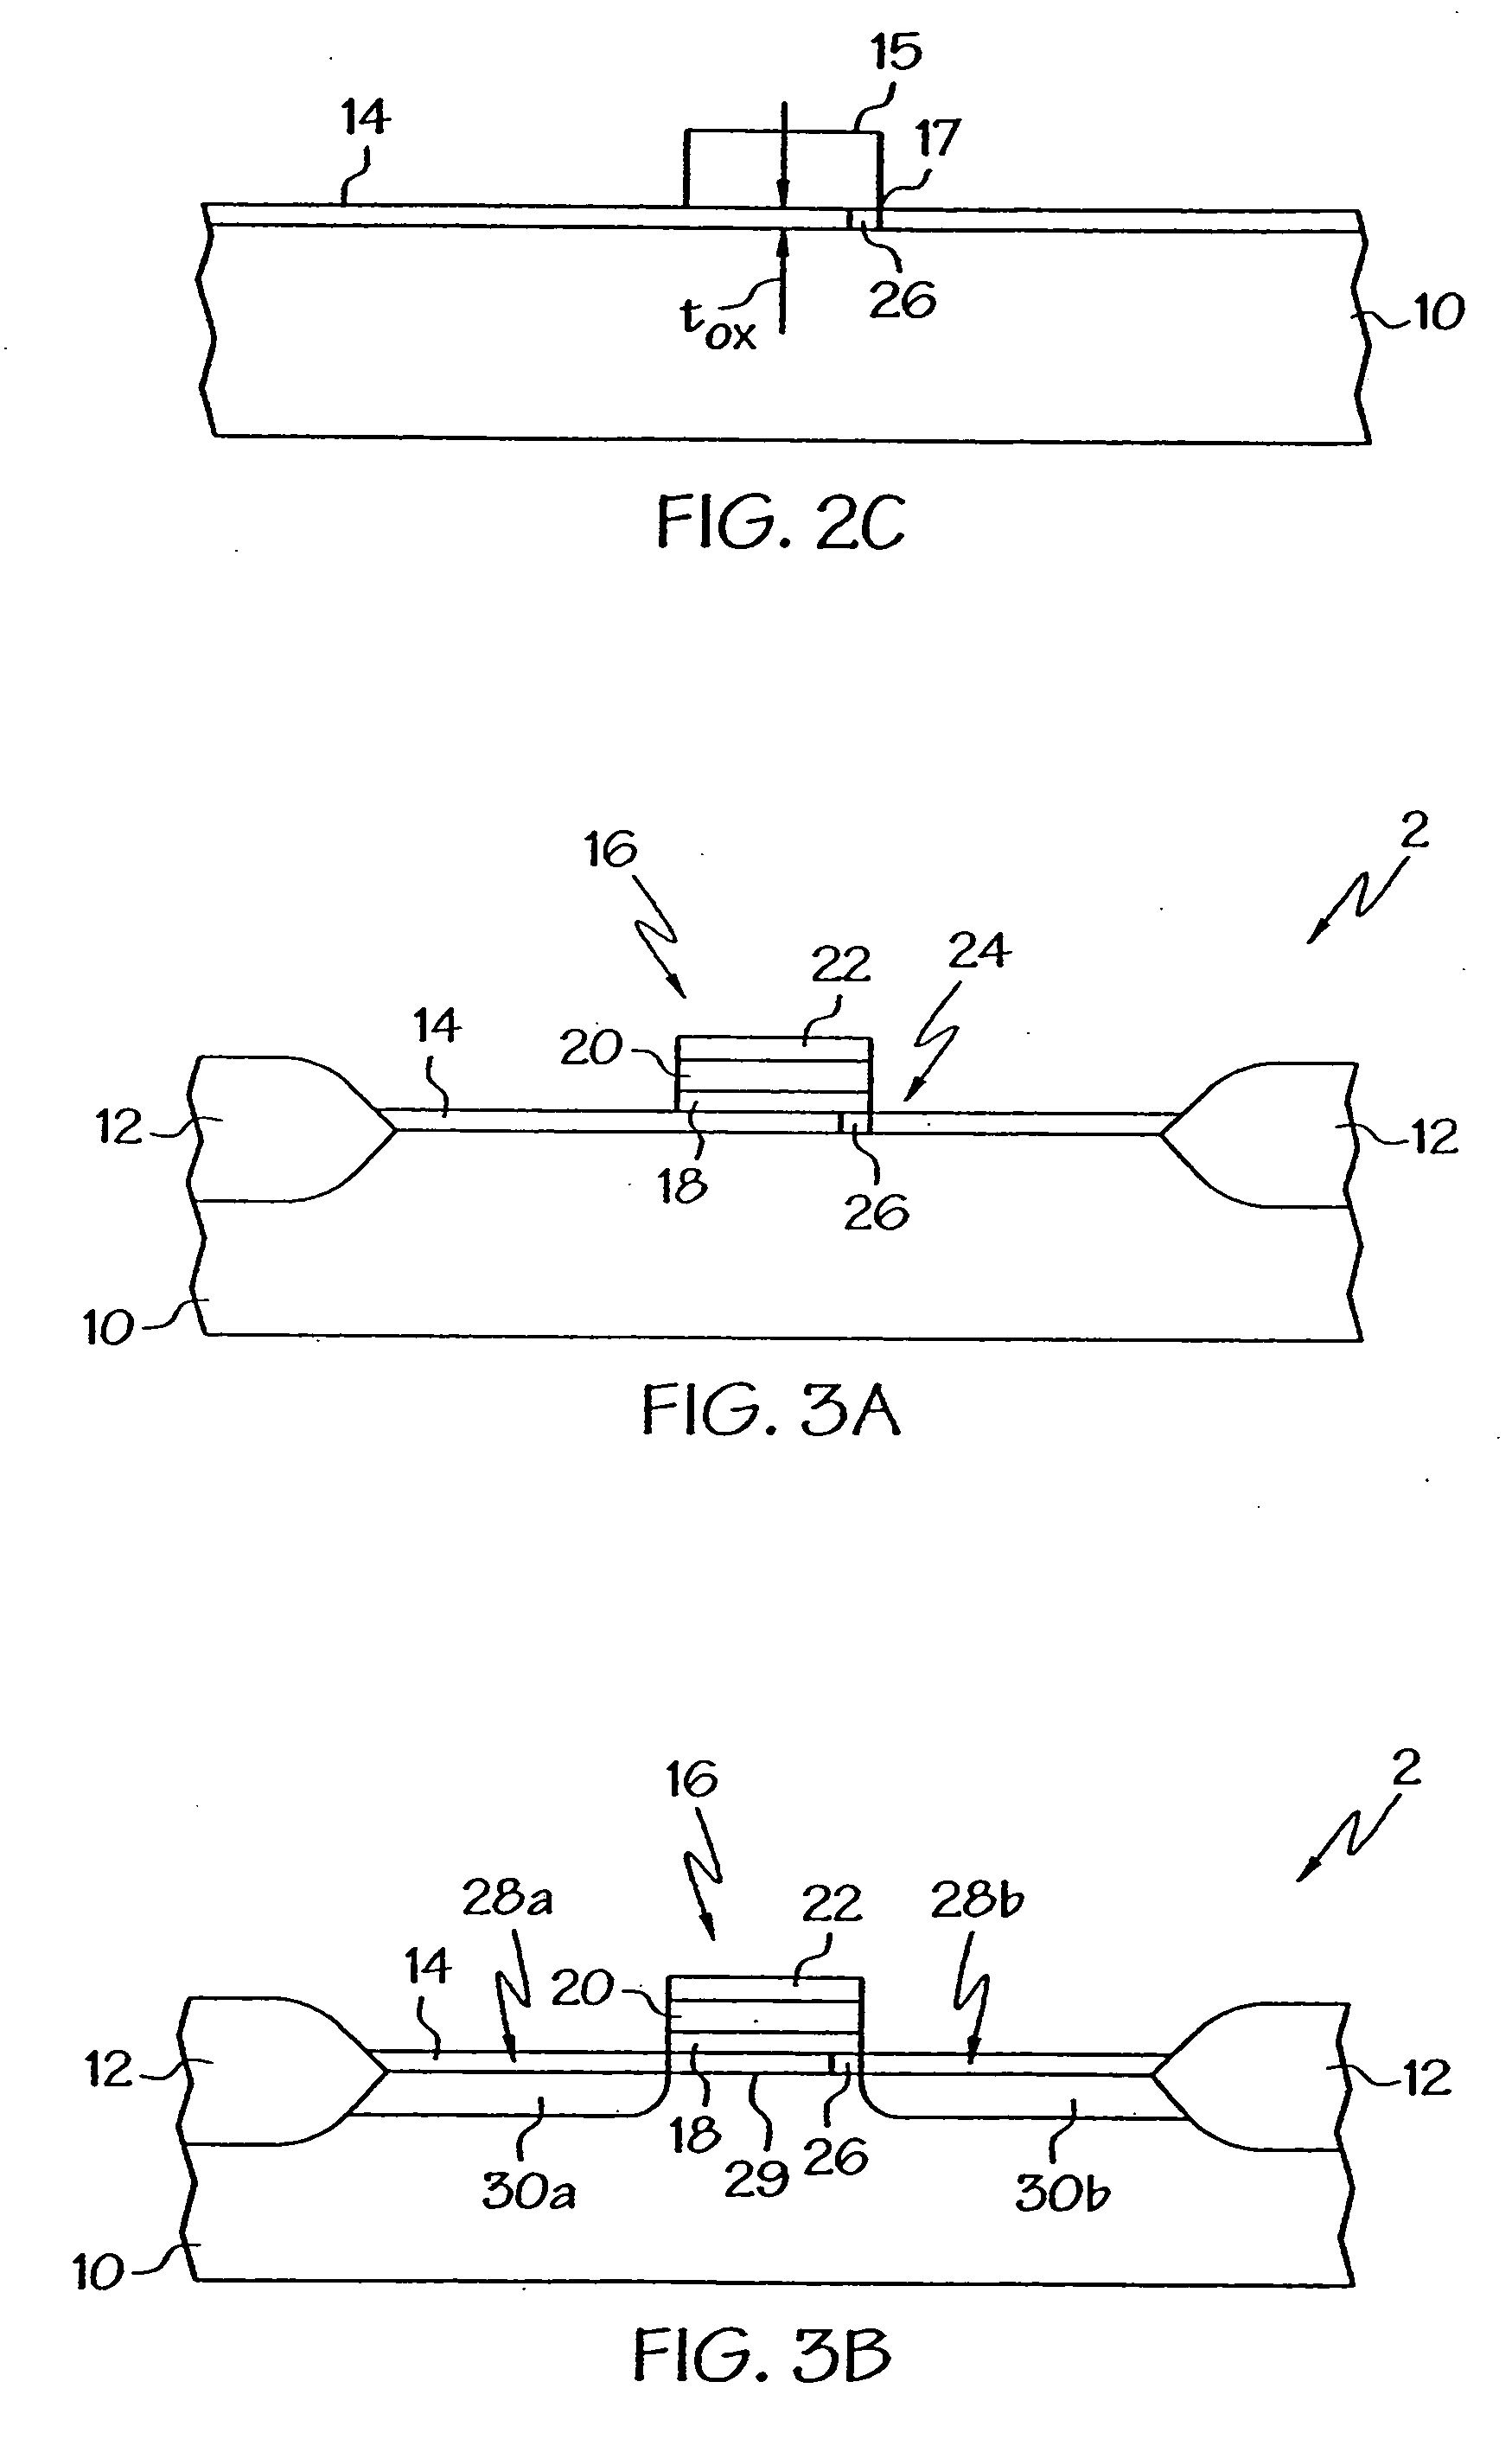 Method and device to reduce gate-induced drain leakage (GIDL) current in thin gate oxide MOSFETs